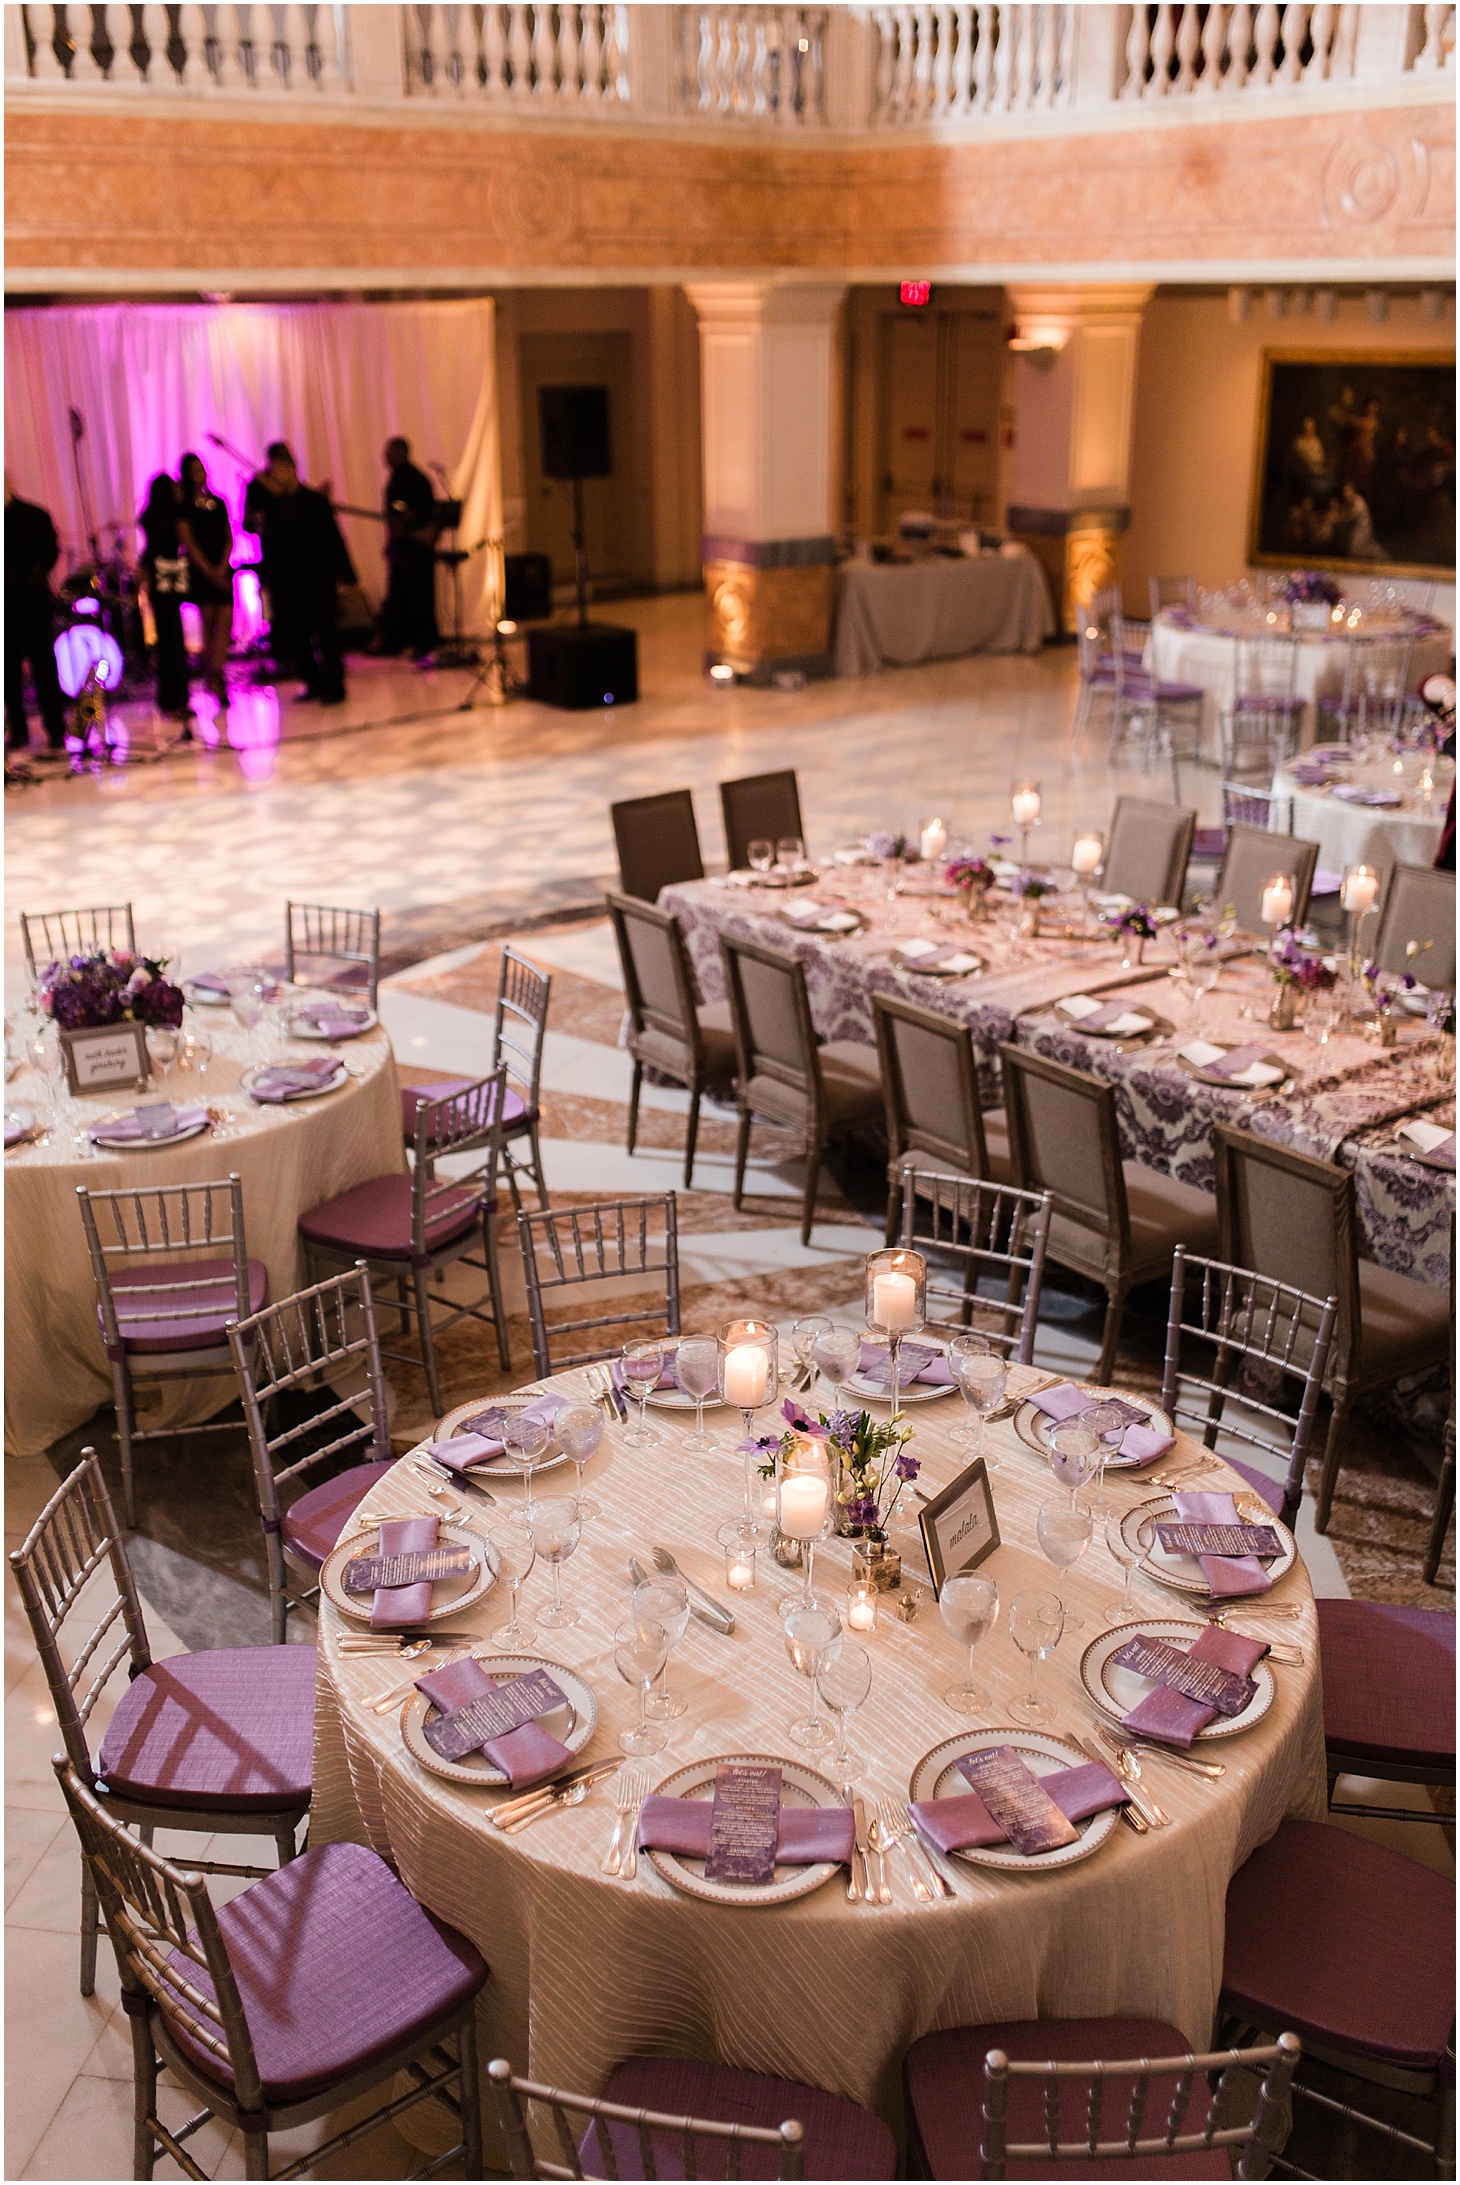 Wedding Reception at National Museum of Women in the Arts, Museum-Inspired Spring Wedding in Washington DC, Sarah Bradshaw Photography, DC Wedding Photographer